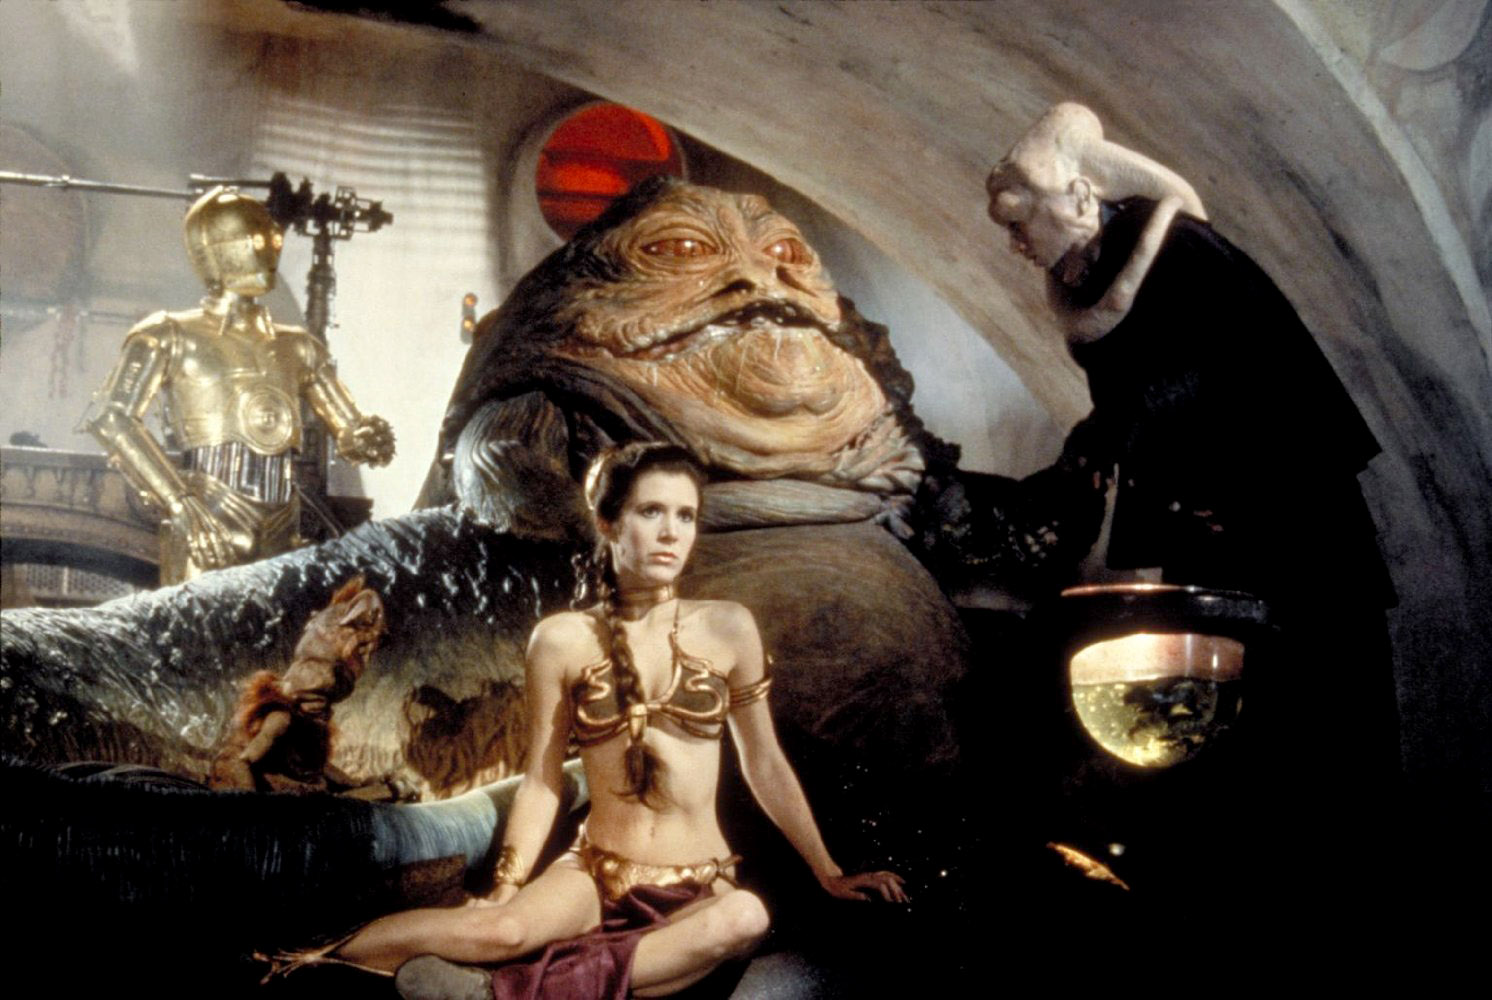 PHOTO: Carrie Fisher, center, as Princess Leia, in a scene from "Star Wars: Return of the Jedi."